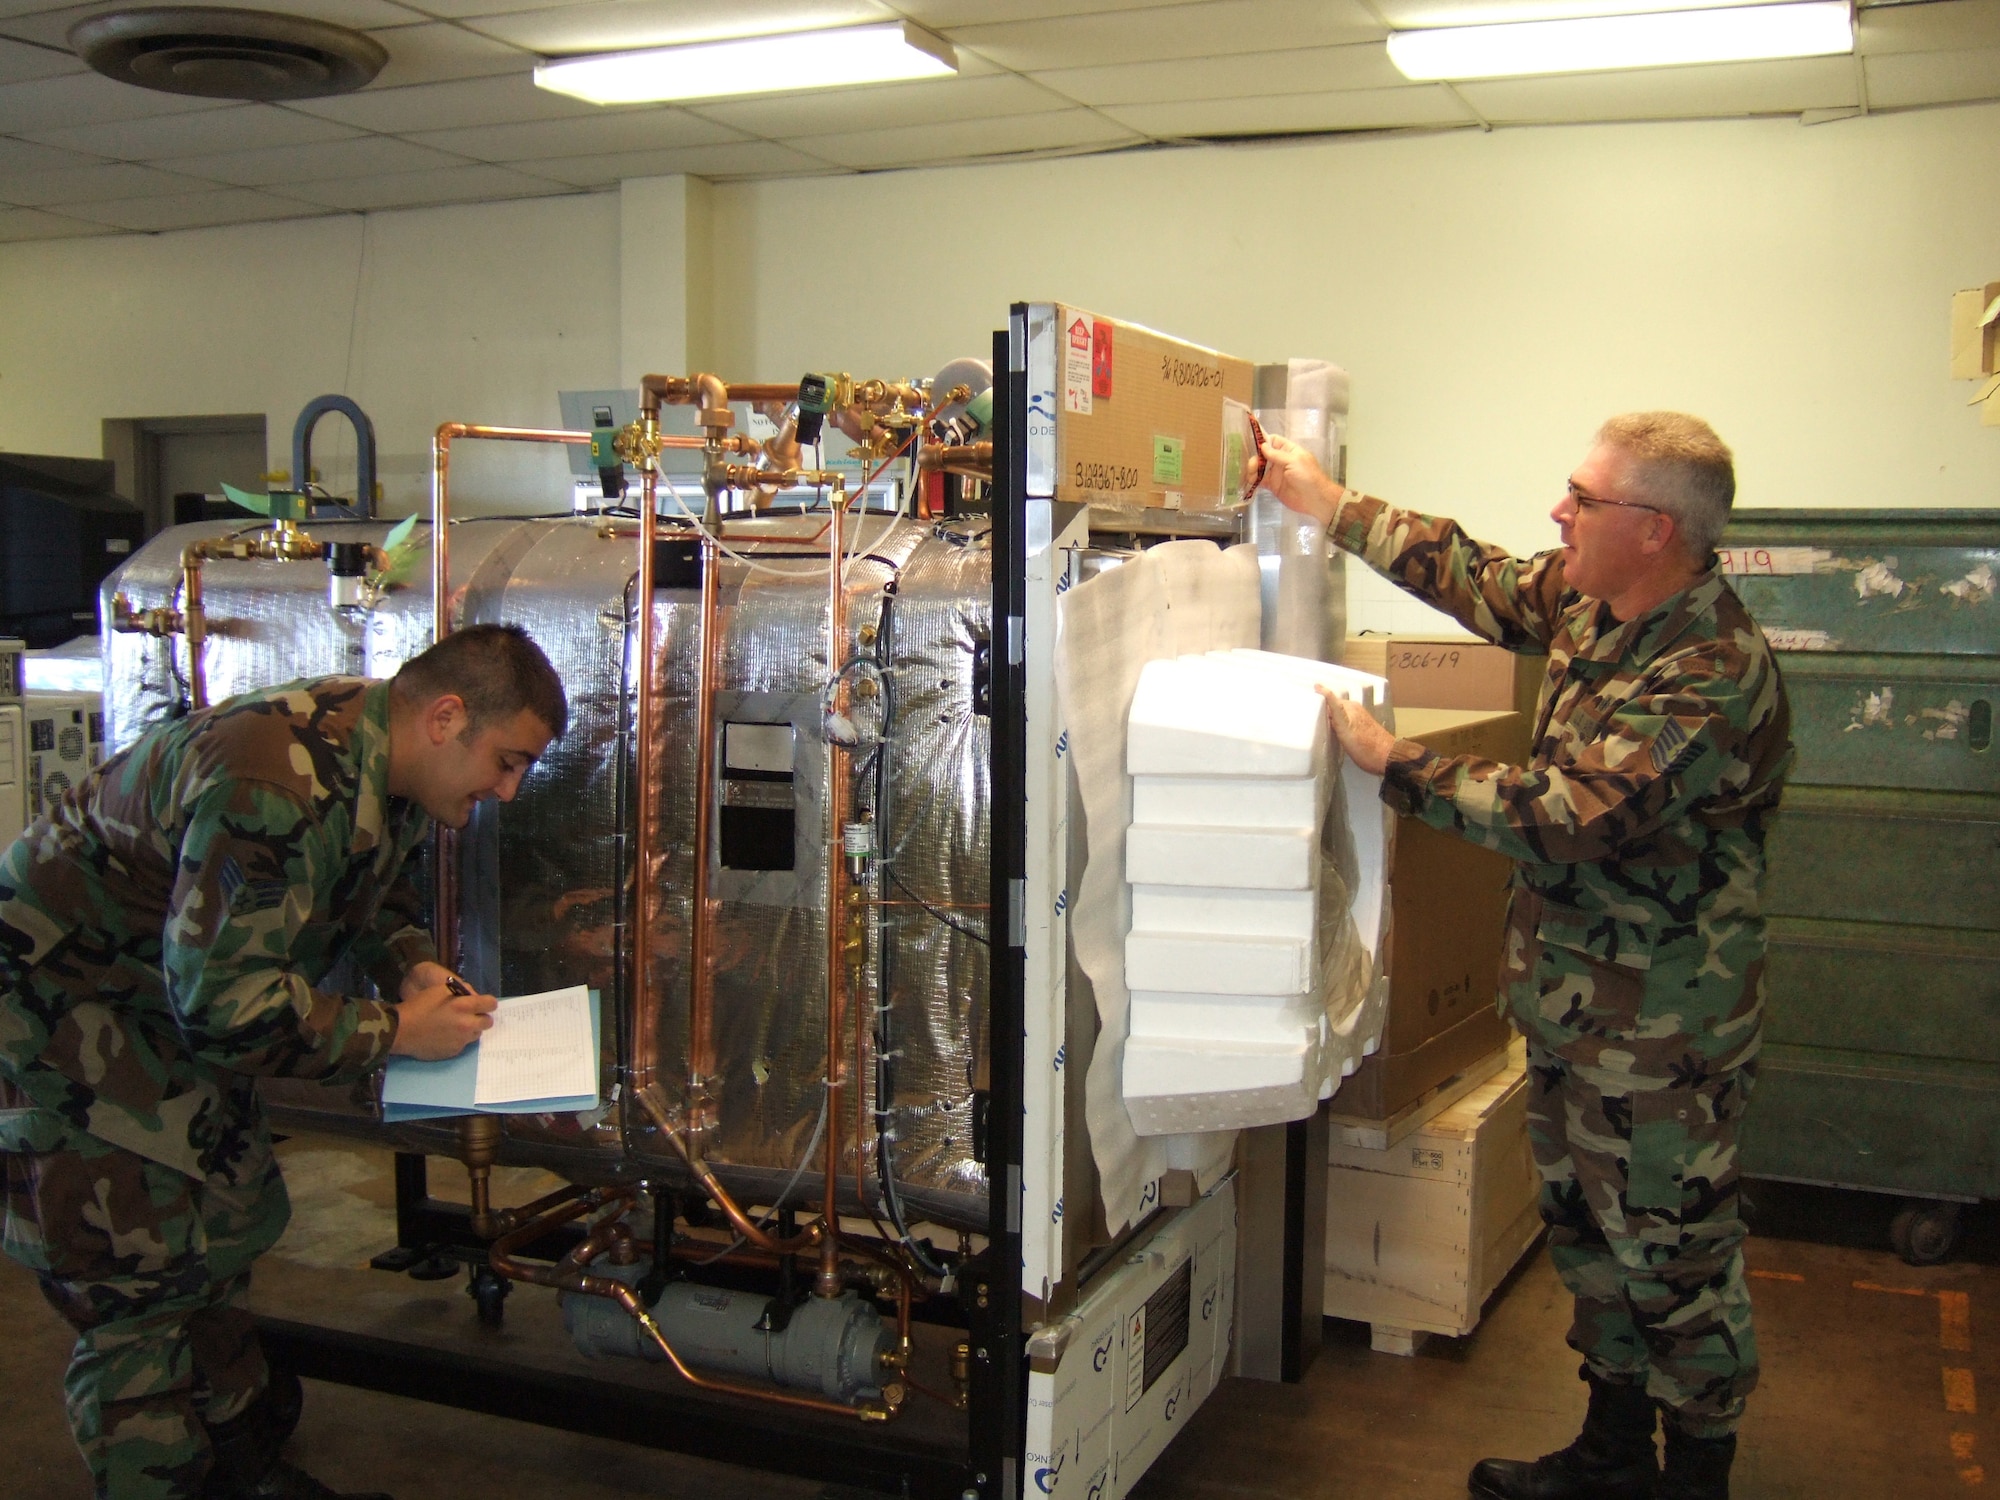 Staff Sgt. Joseph Ruisi and Tech. Sgt. Tony Belcher, members of the 882nd Training Support Squadron, unwrap and inspect a new sterilizer for a surgery course.  The 882nd TRSS recently won the AETC award for Technical Support Squadron of 2006. (U.S. Air Force photo/Courtesy of 882 TRSS)